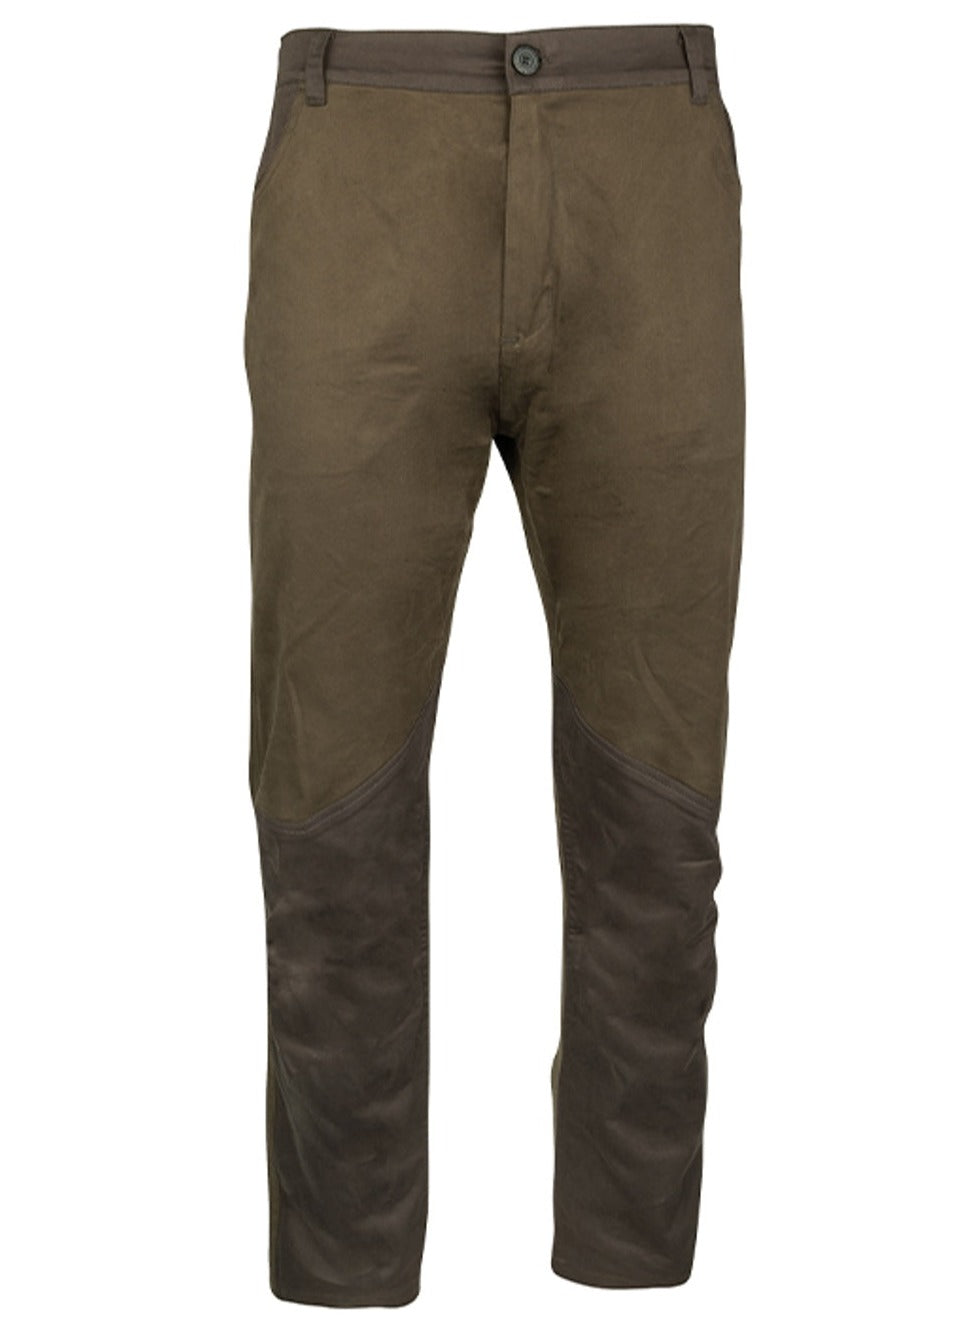 Mens Country Style Trousers  British Tweed  Cotton Jeans